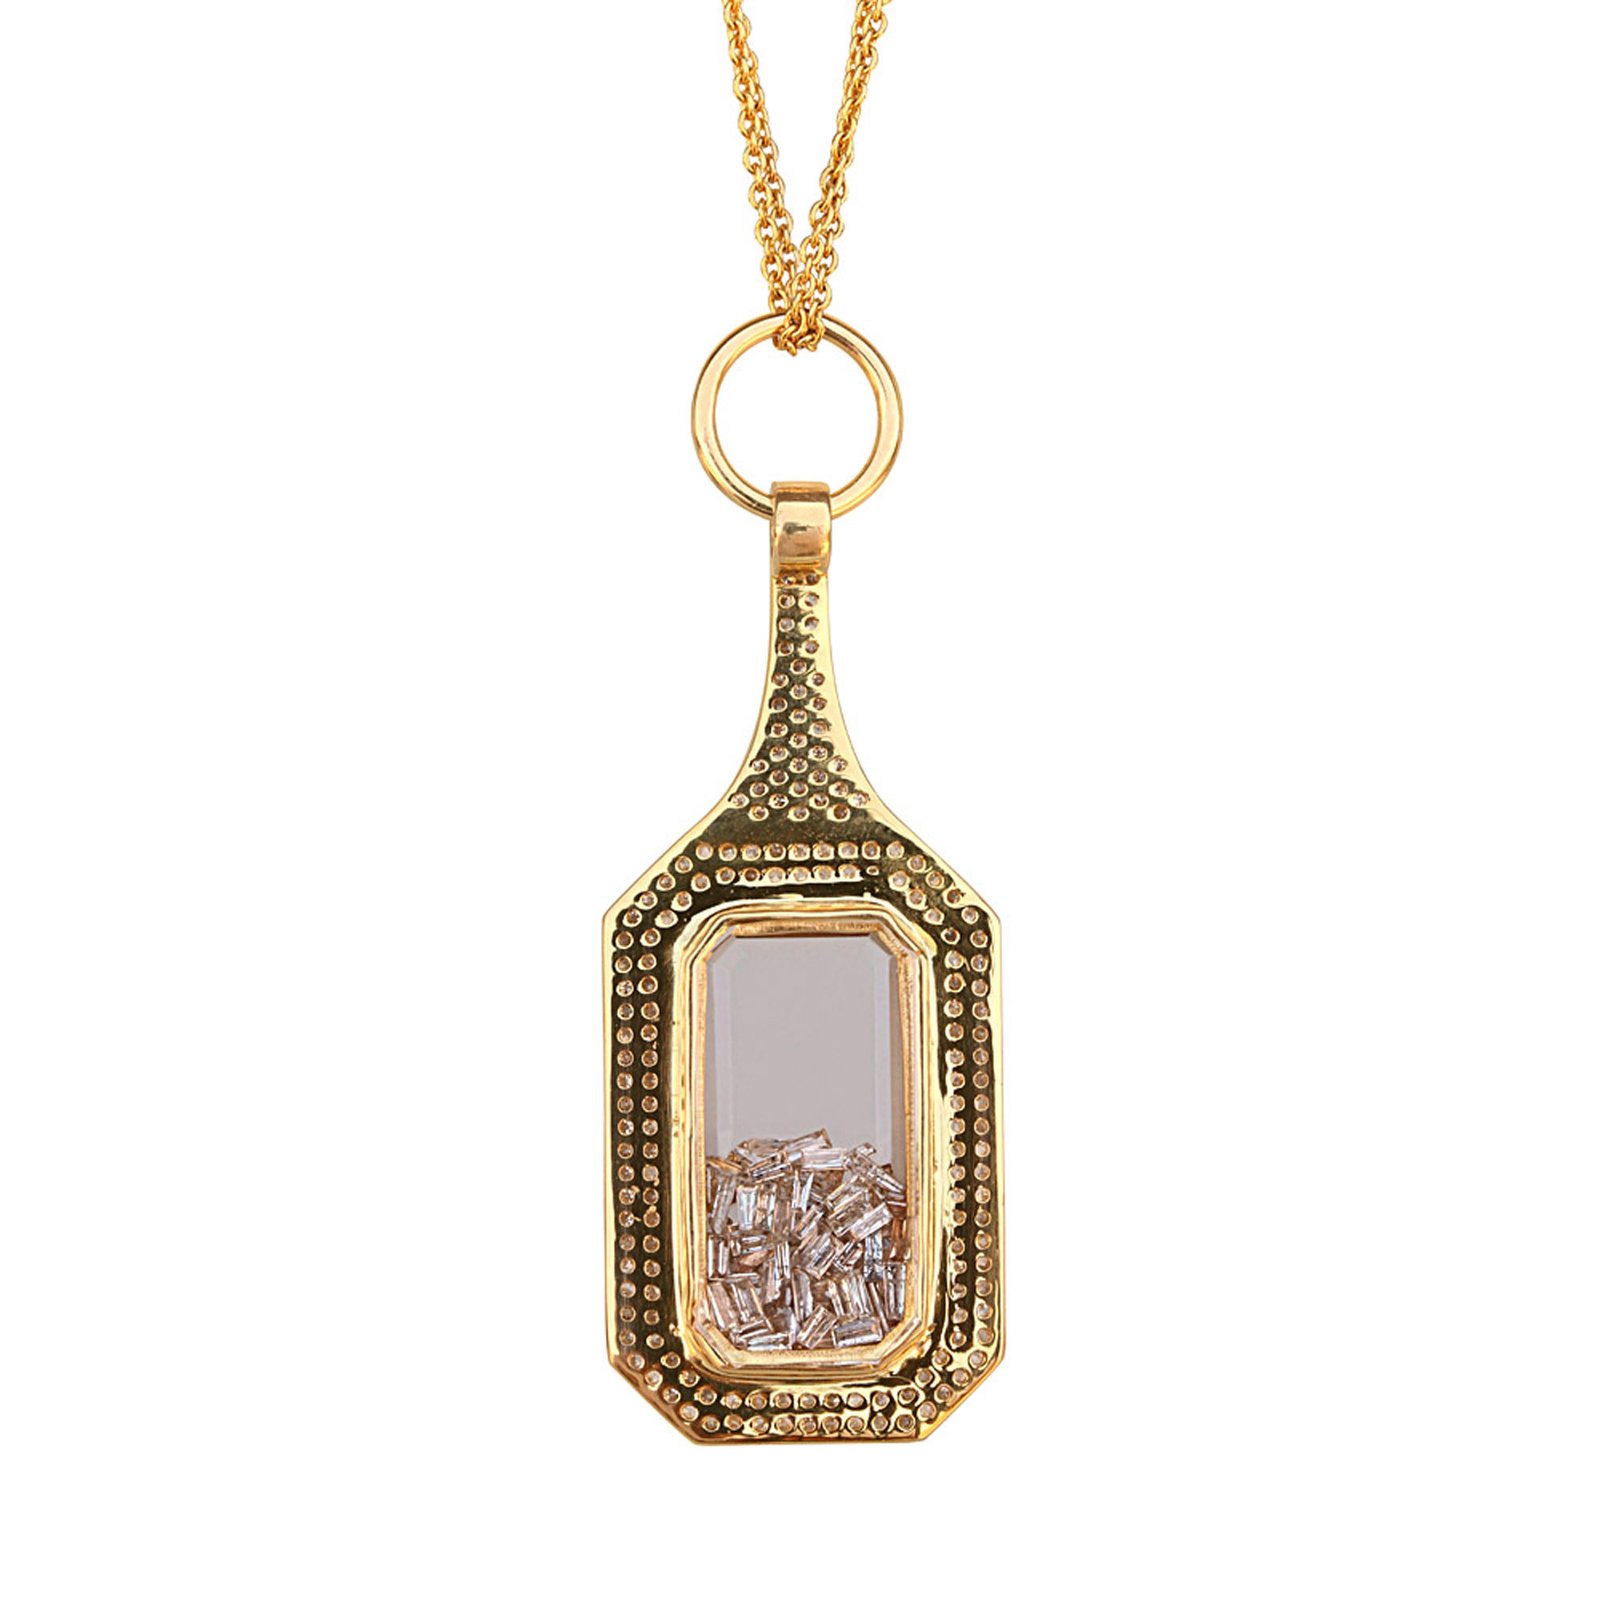 18k solid gold diamond crystal shaker pendant with chain